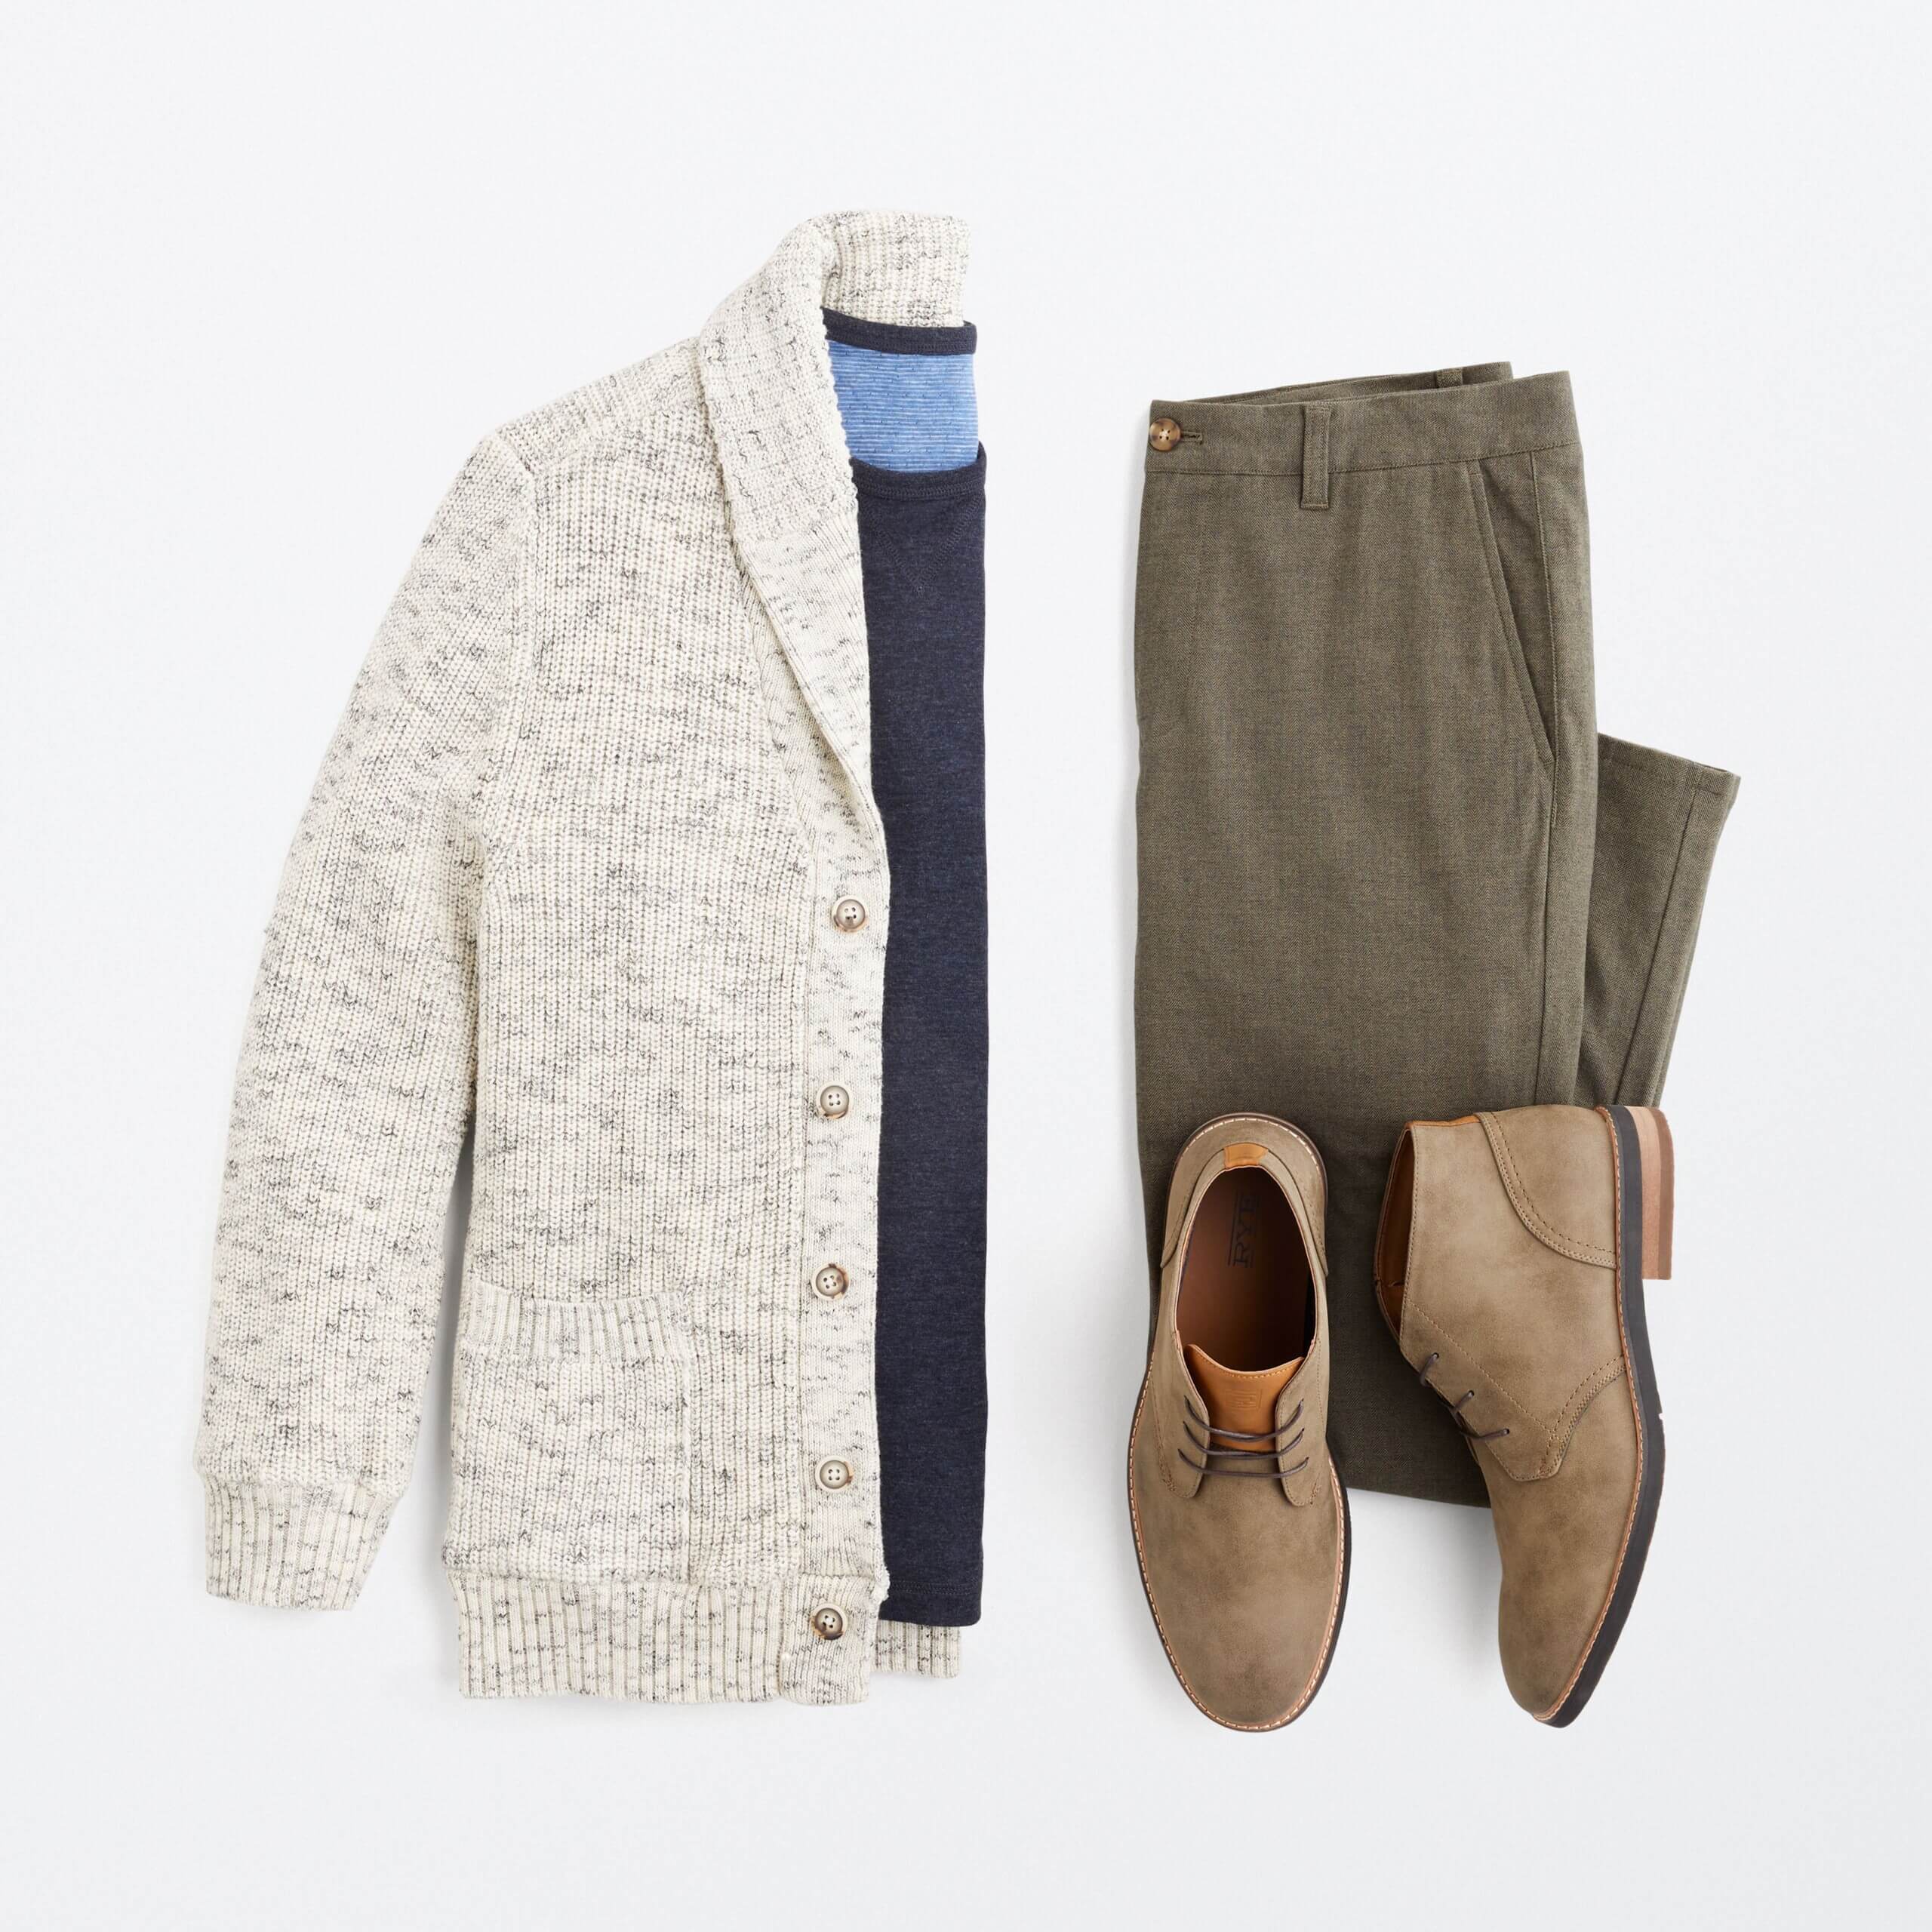 Stitch Fix men's outfit laydown featuring cream cardigan, navy pullover, olive chino pants and chukka boots.